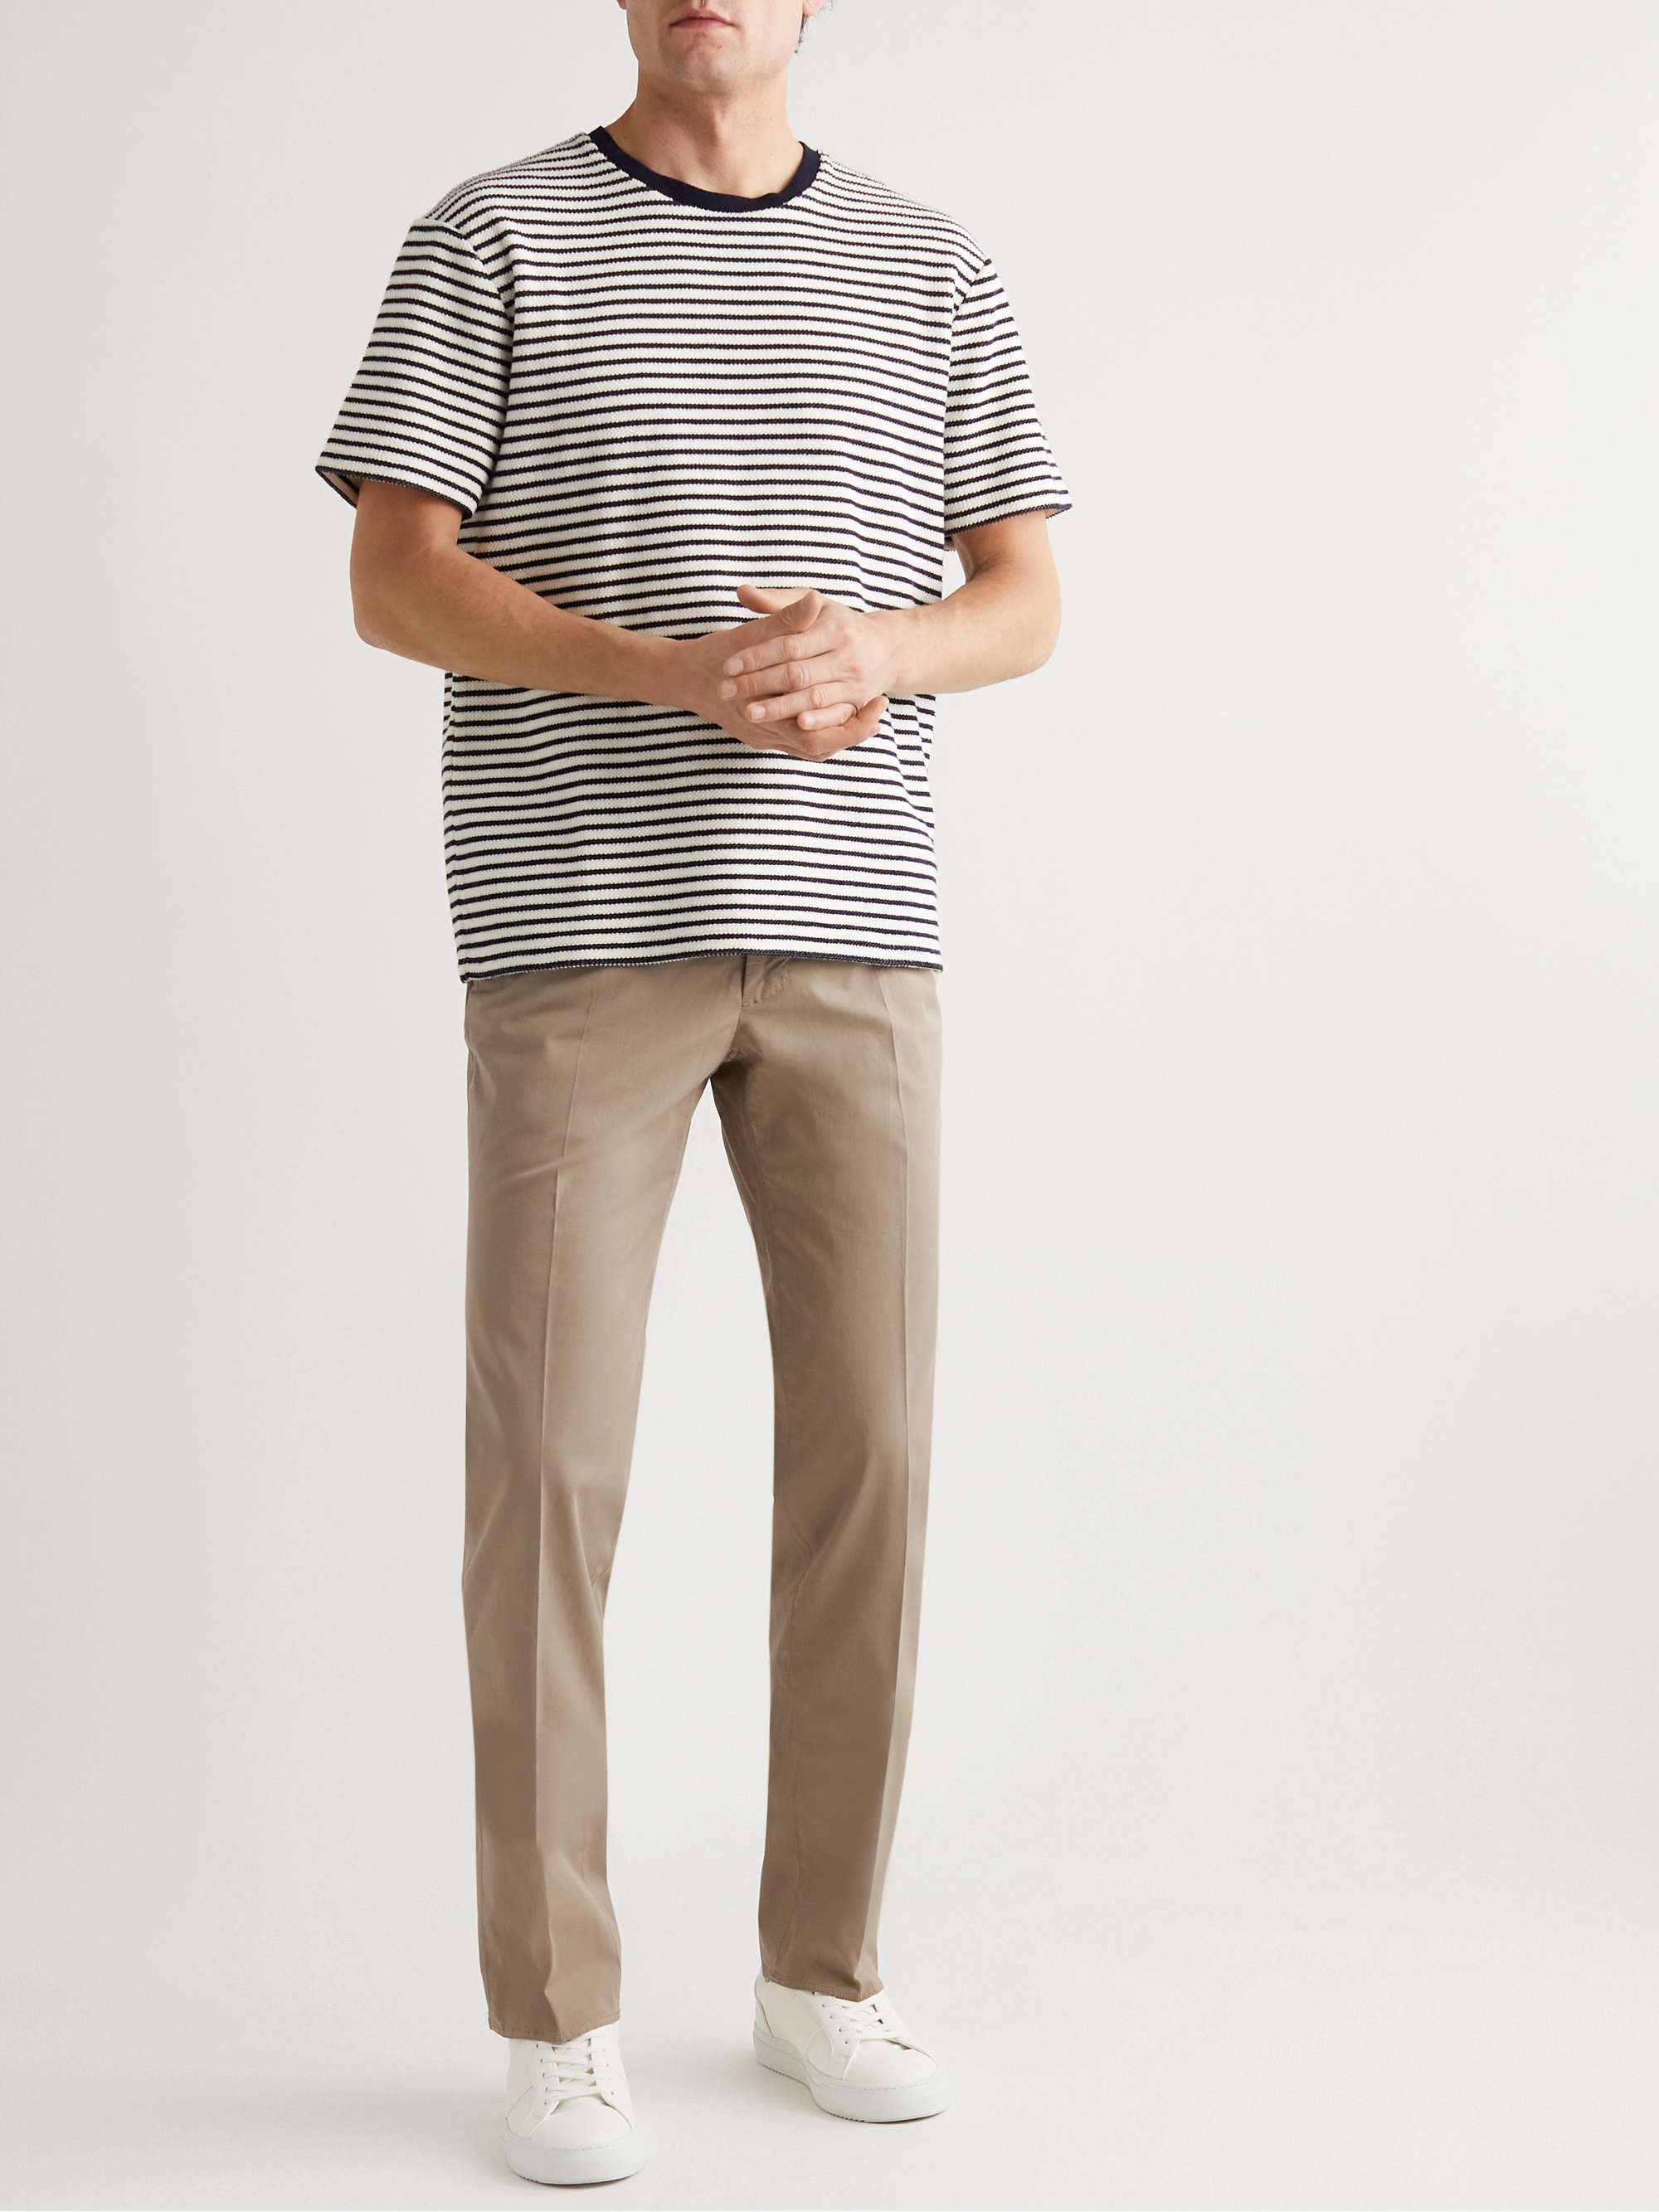 INCOTEX Four Season Relaxed-Fit Cotton-Blend Chinos